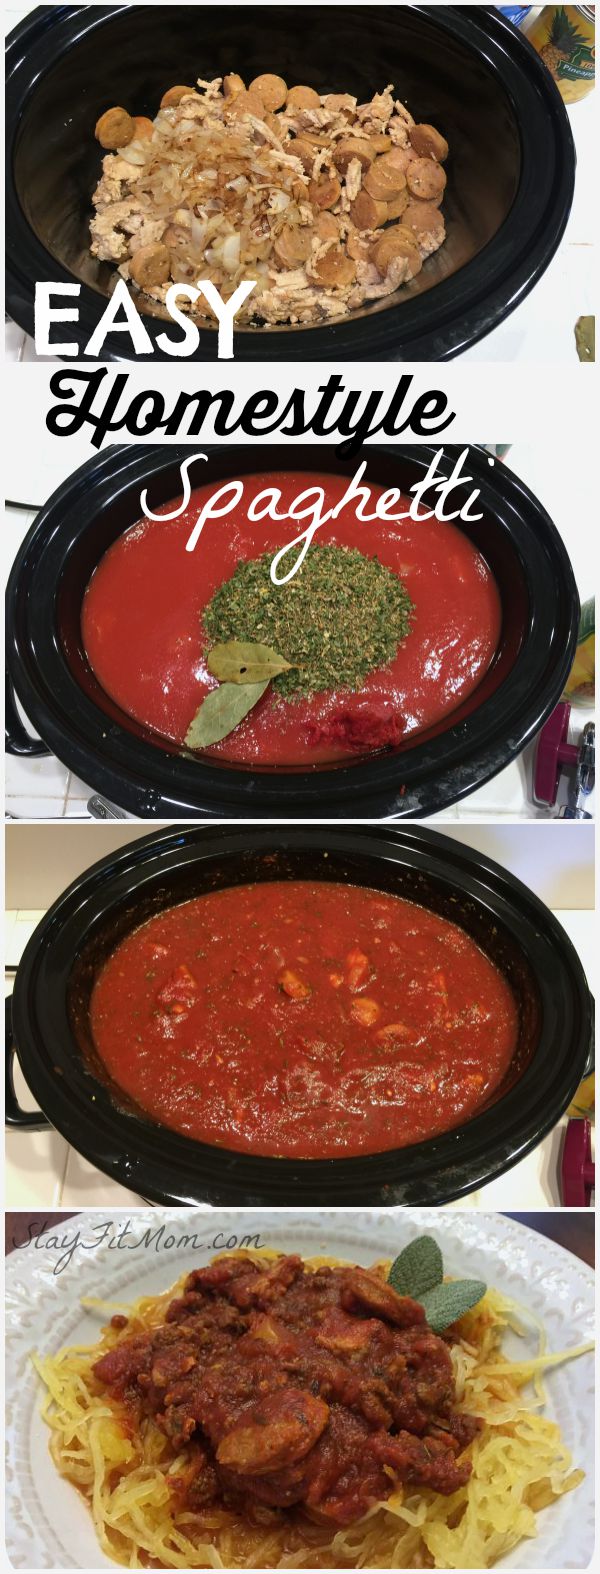 Paleo and Whole 30 compliant. You will never by spaghetti again!